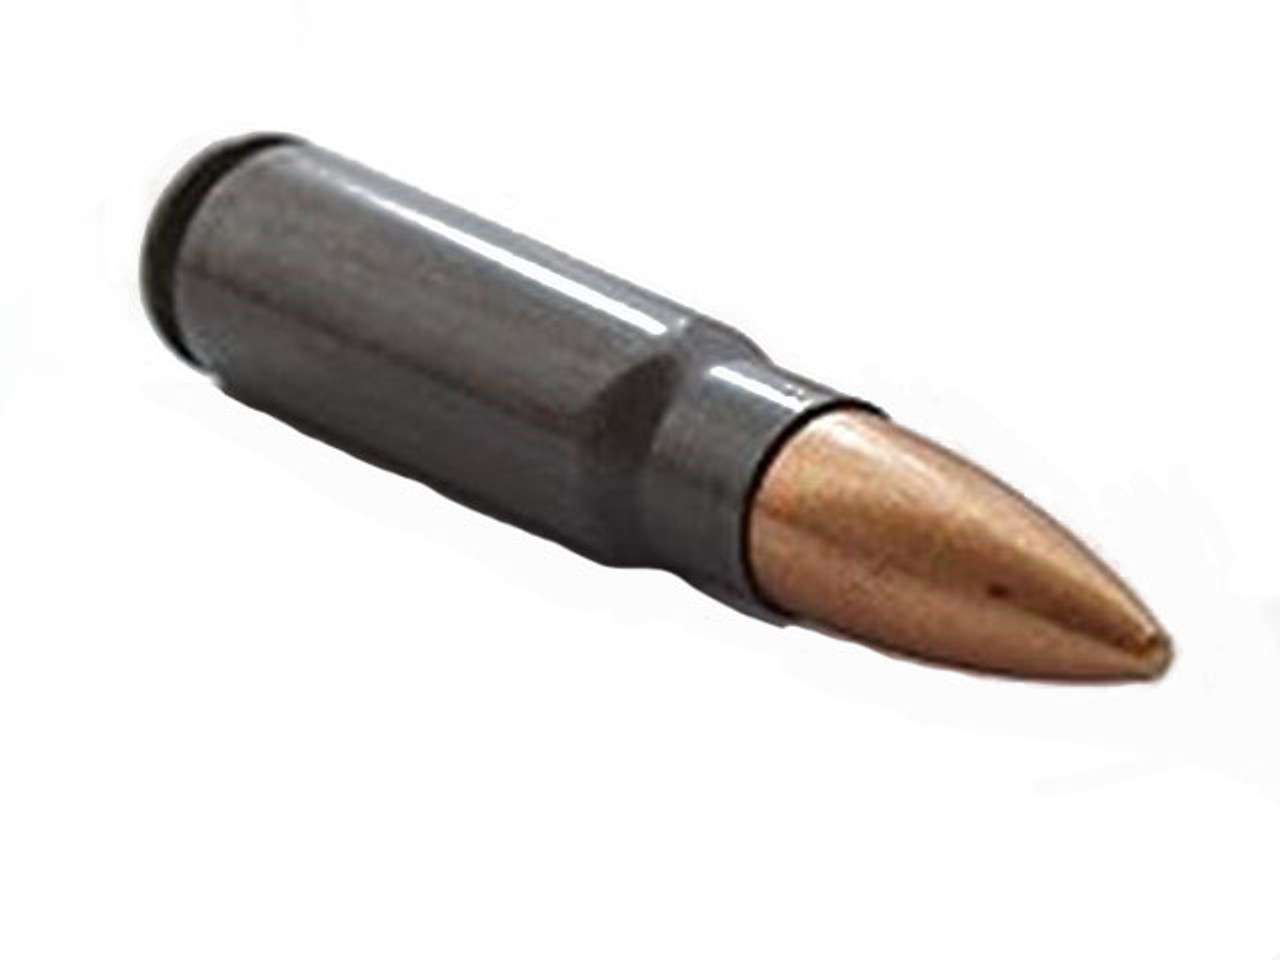 7.62 x 39 (AK-47) Brass casing with a Full Metal Jacket bullet